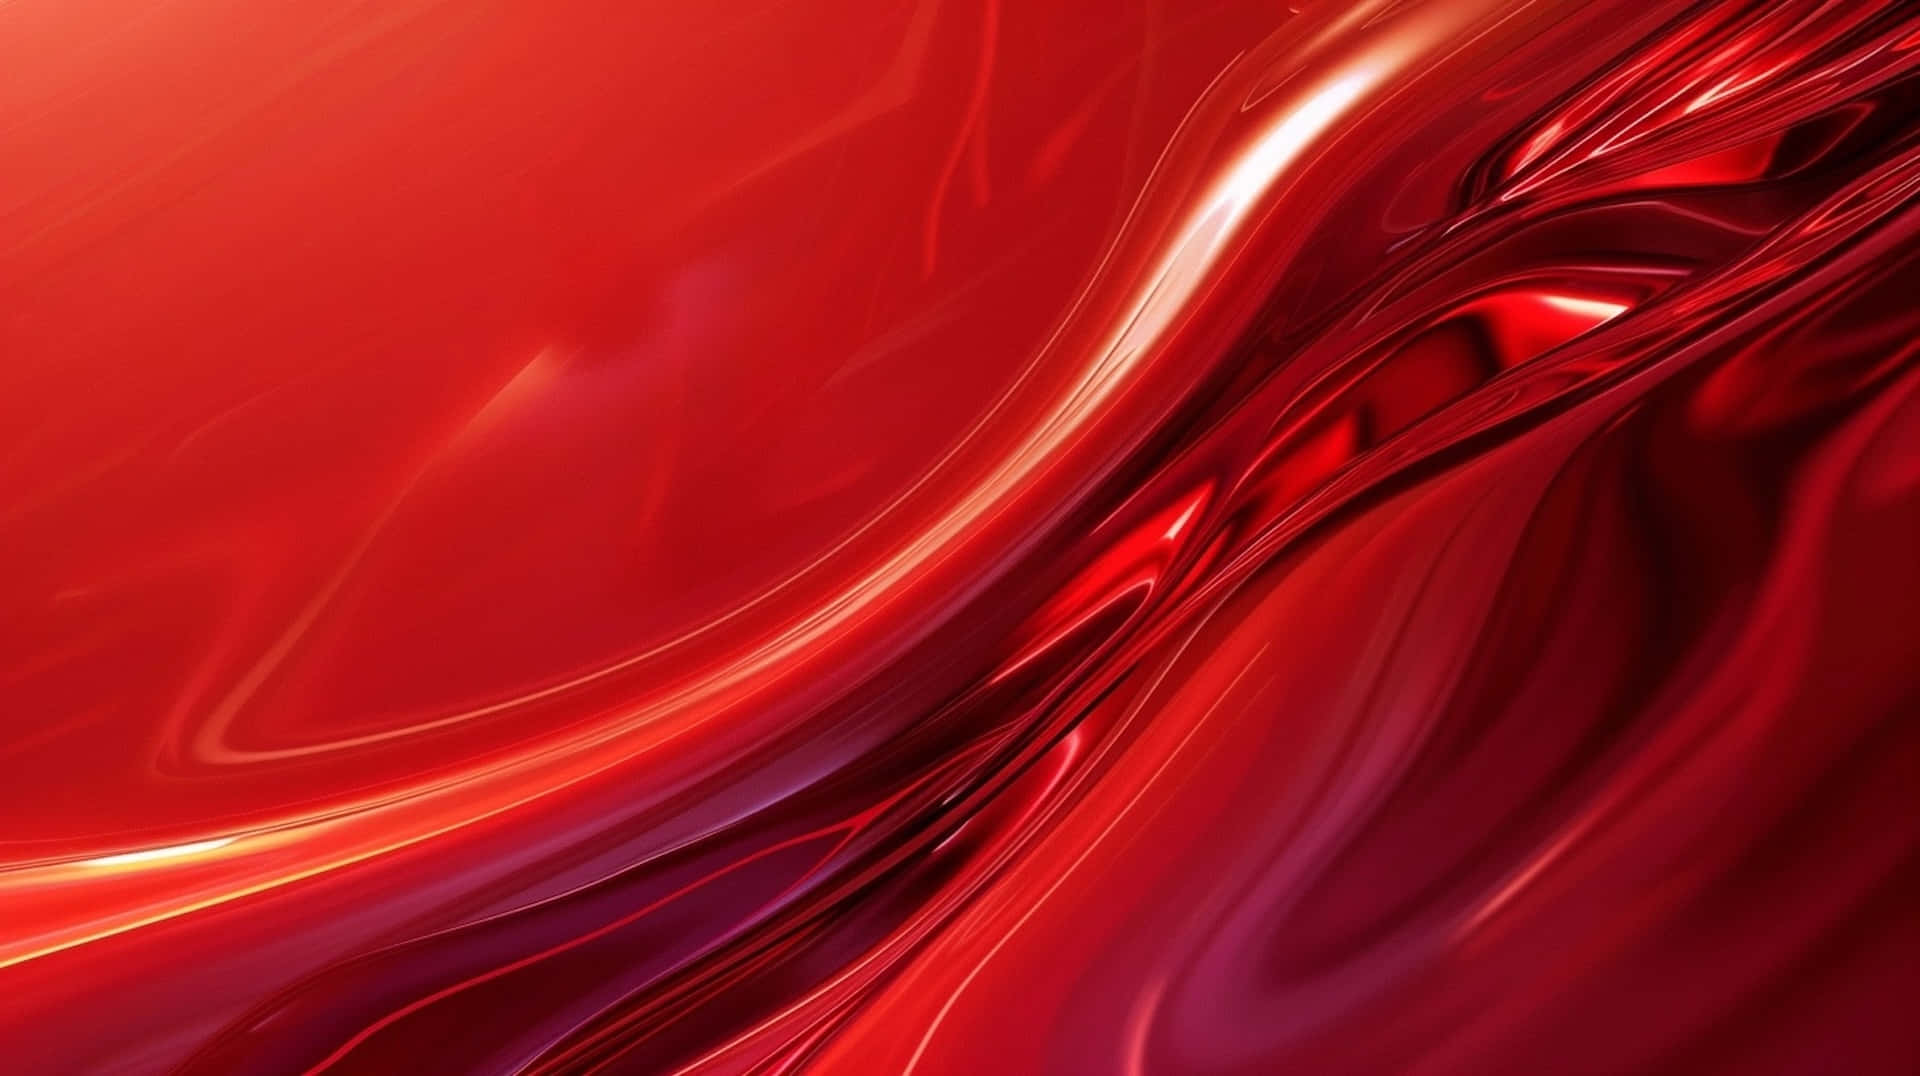 Abstract Red Wave Design Wallpaper